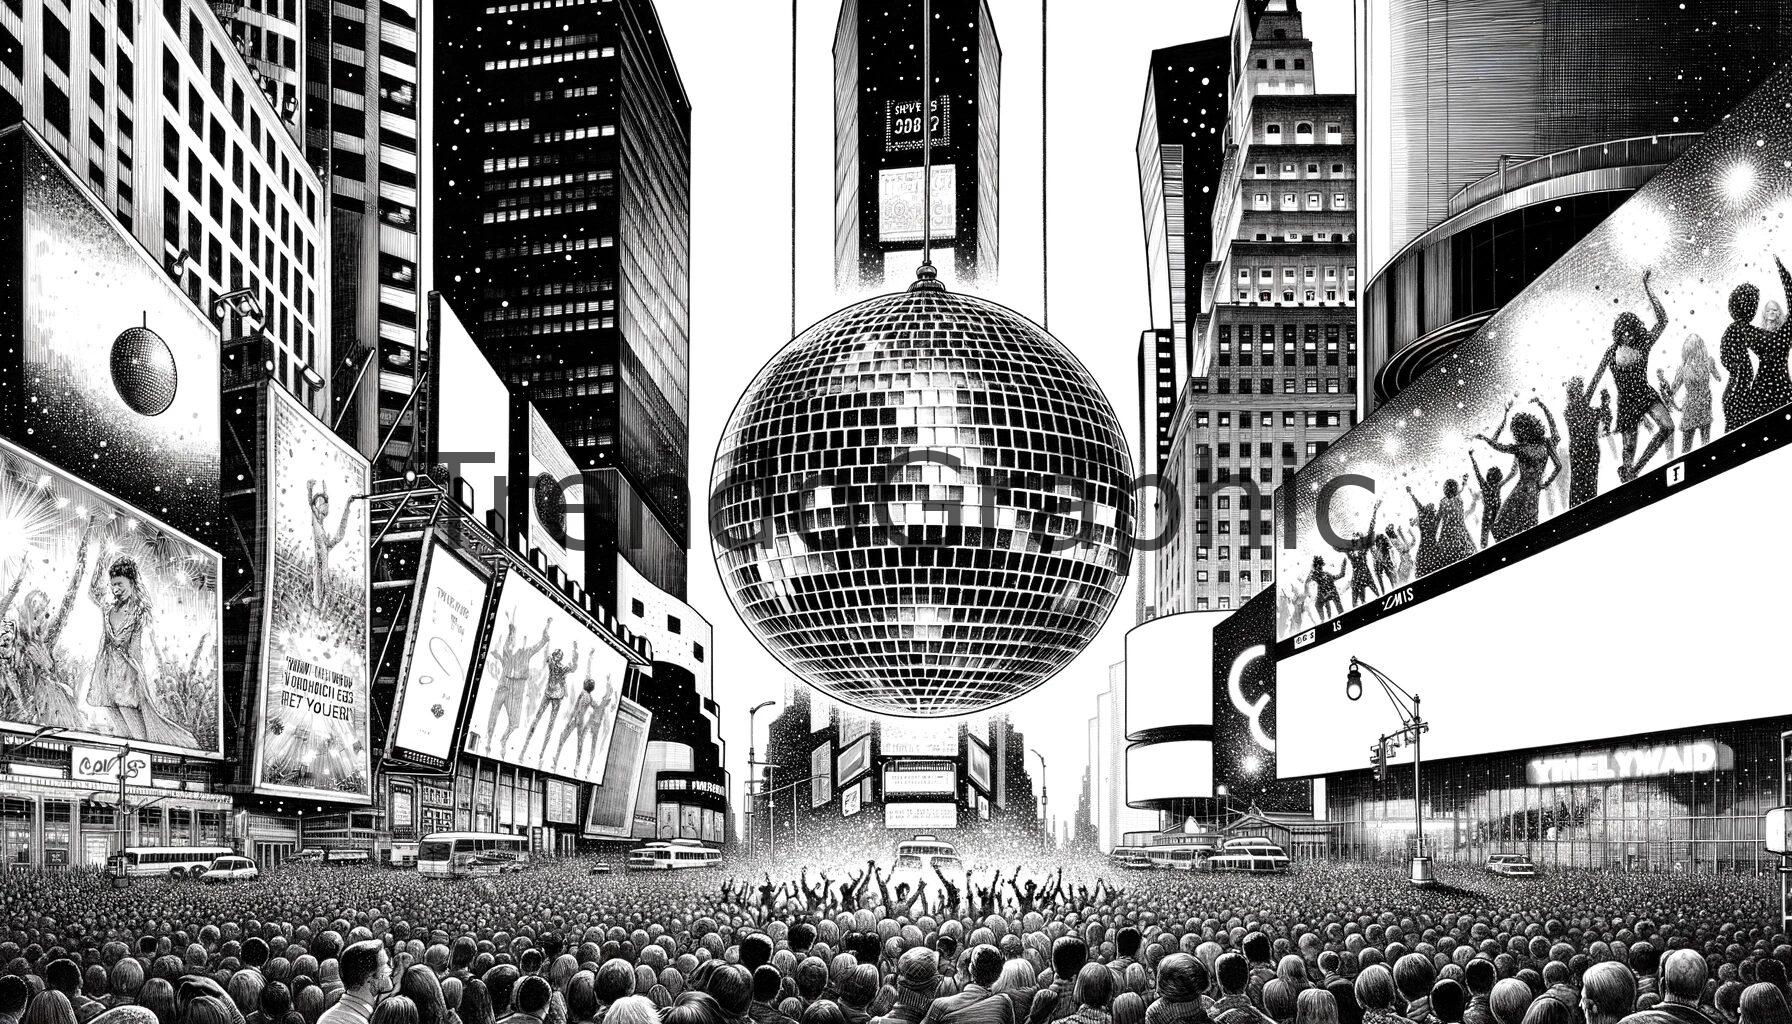 New Year’s Eve Extravaganza: A Giant Disco Ball Lights Up Times Square